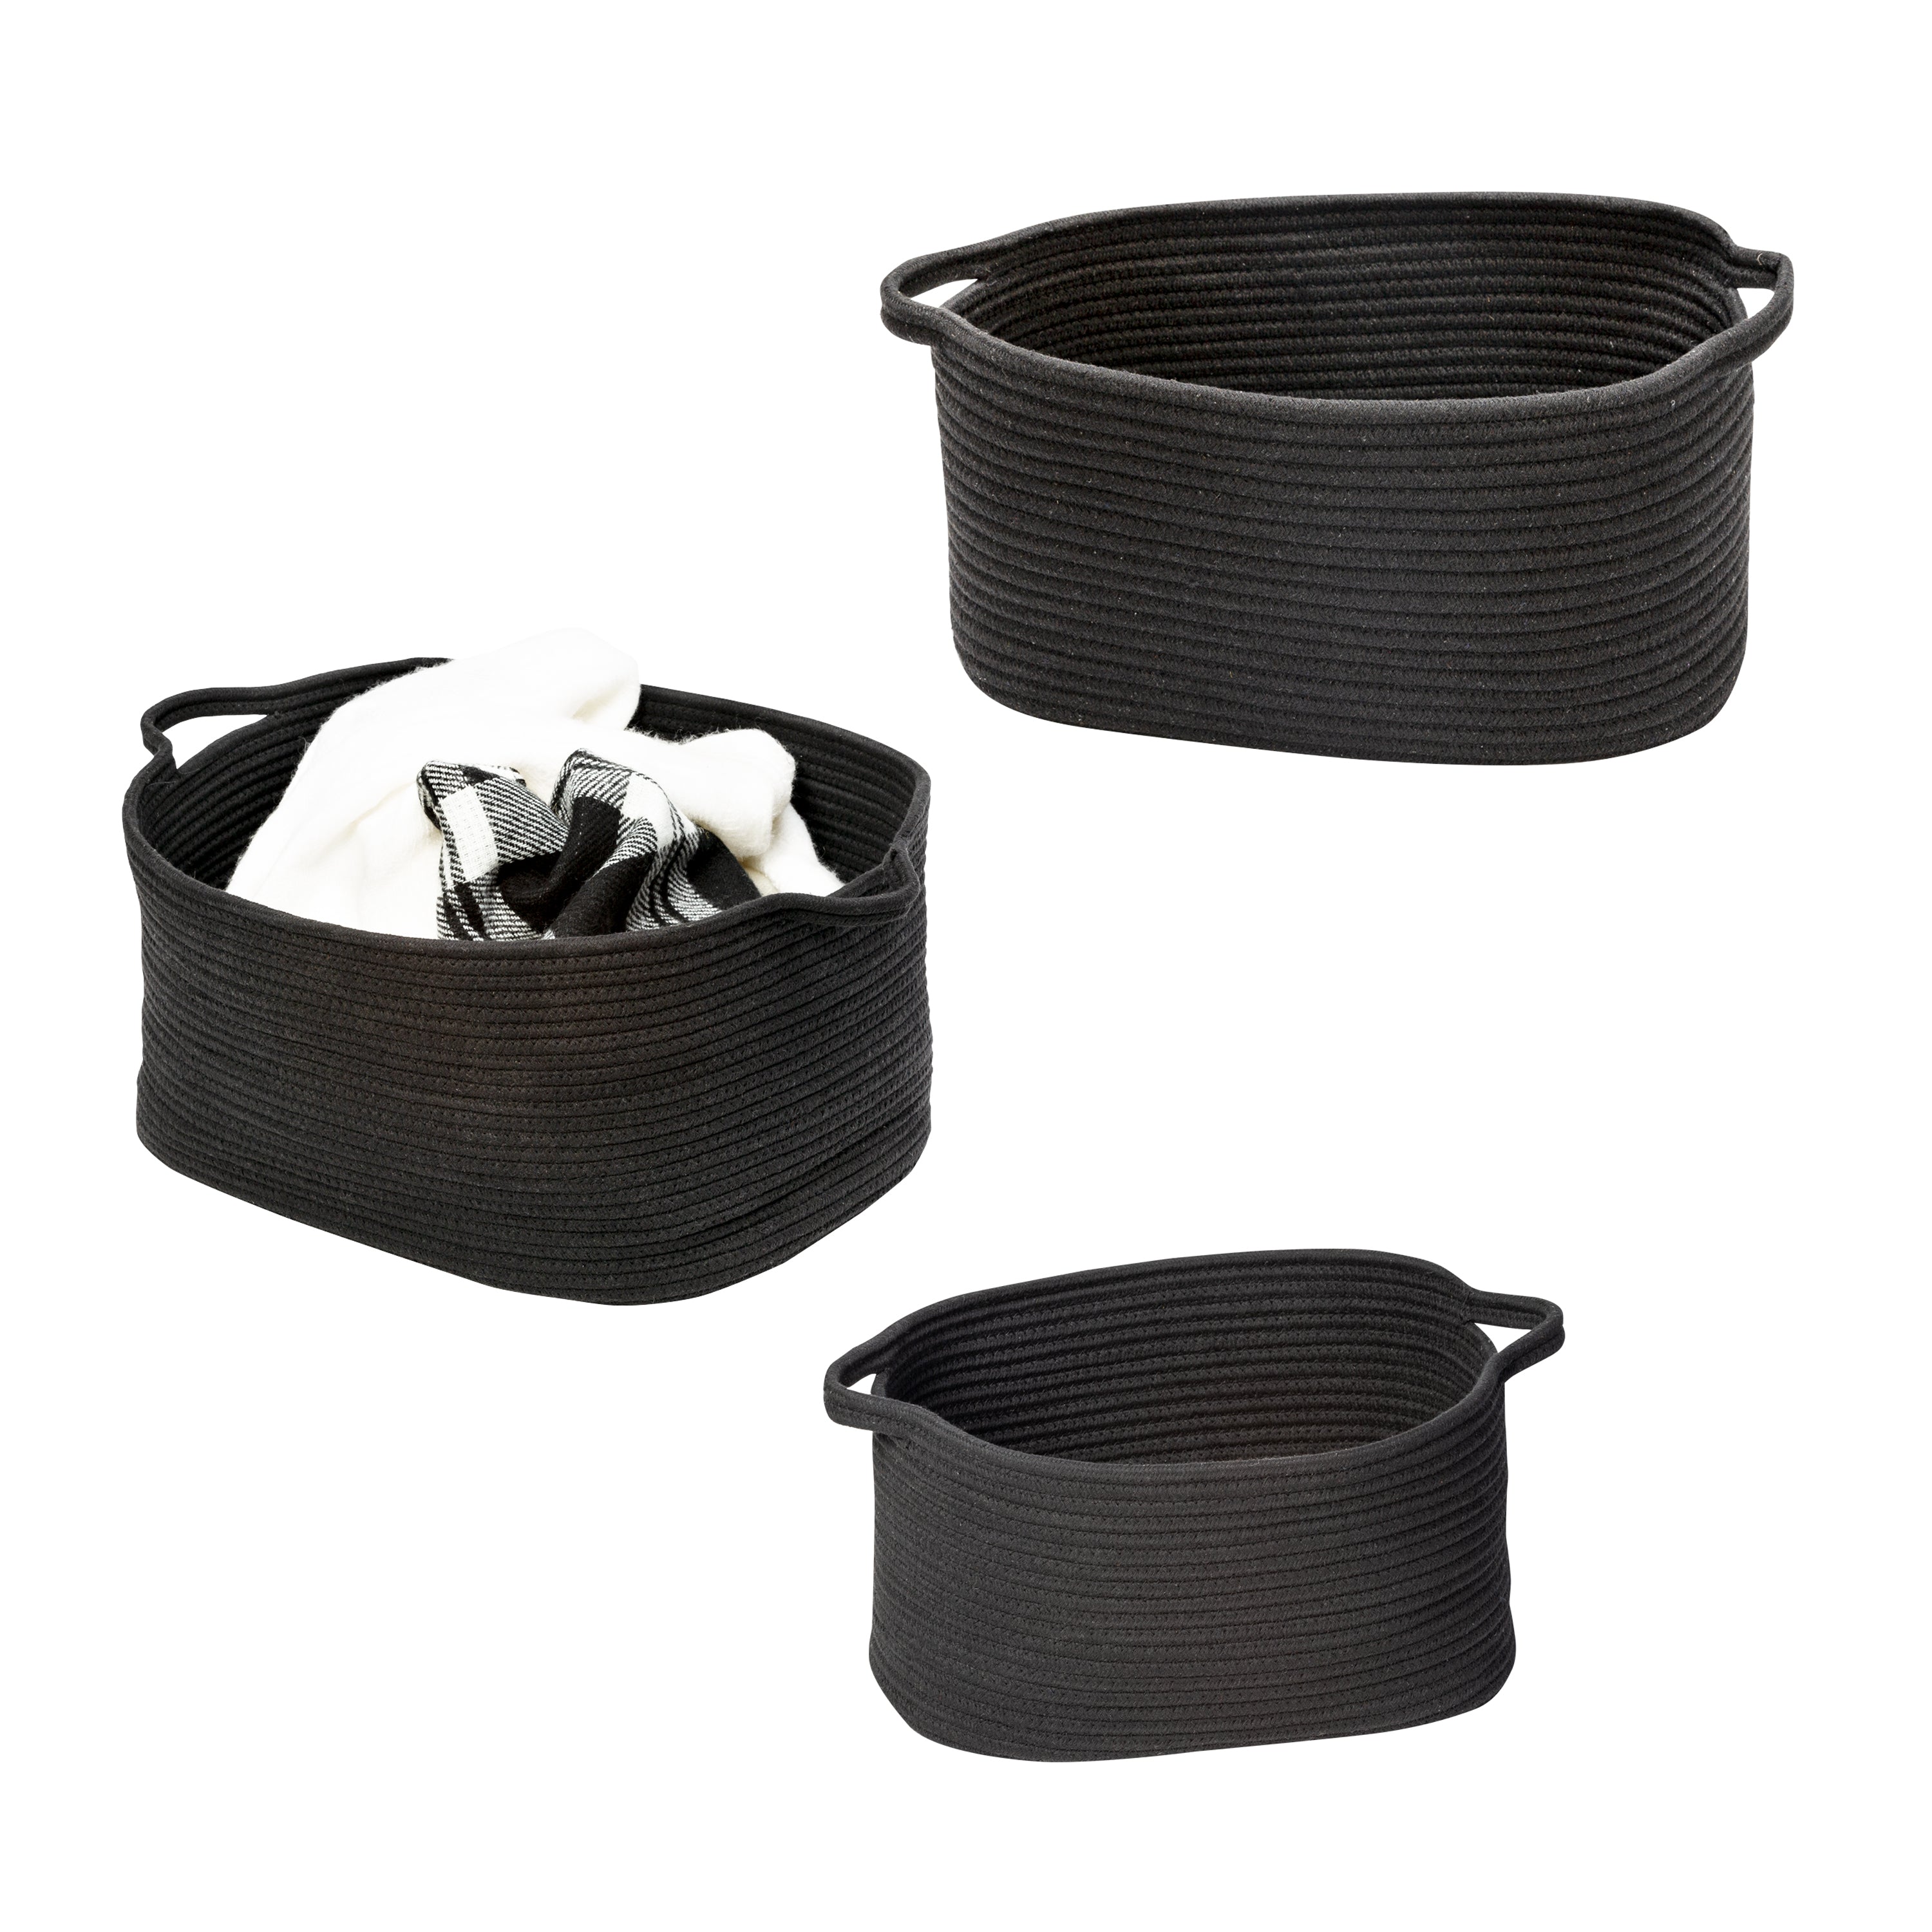 Collapsible Rectangular Handy Basket Rectangle Water Pail Cleaning